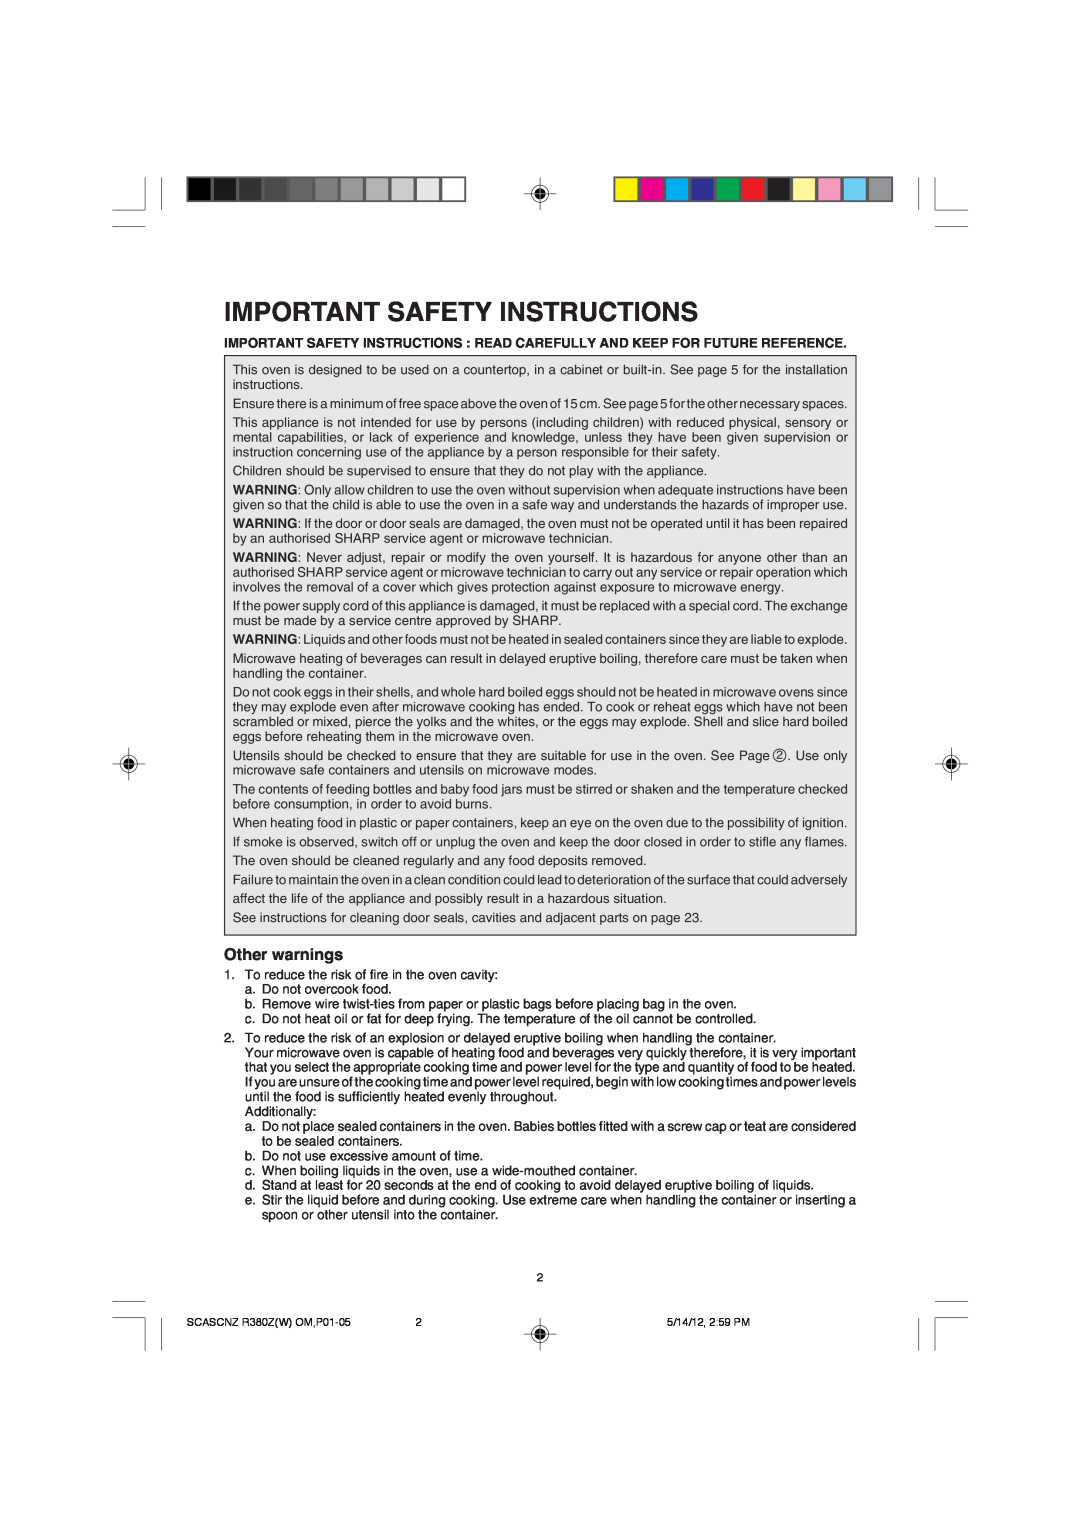 Sharp R-380Z(W) operation manual Important Safety Instructions, Other warnings 